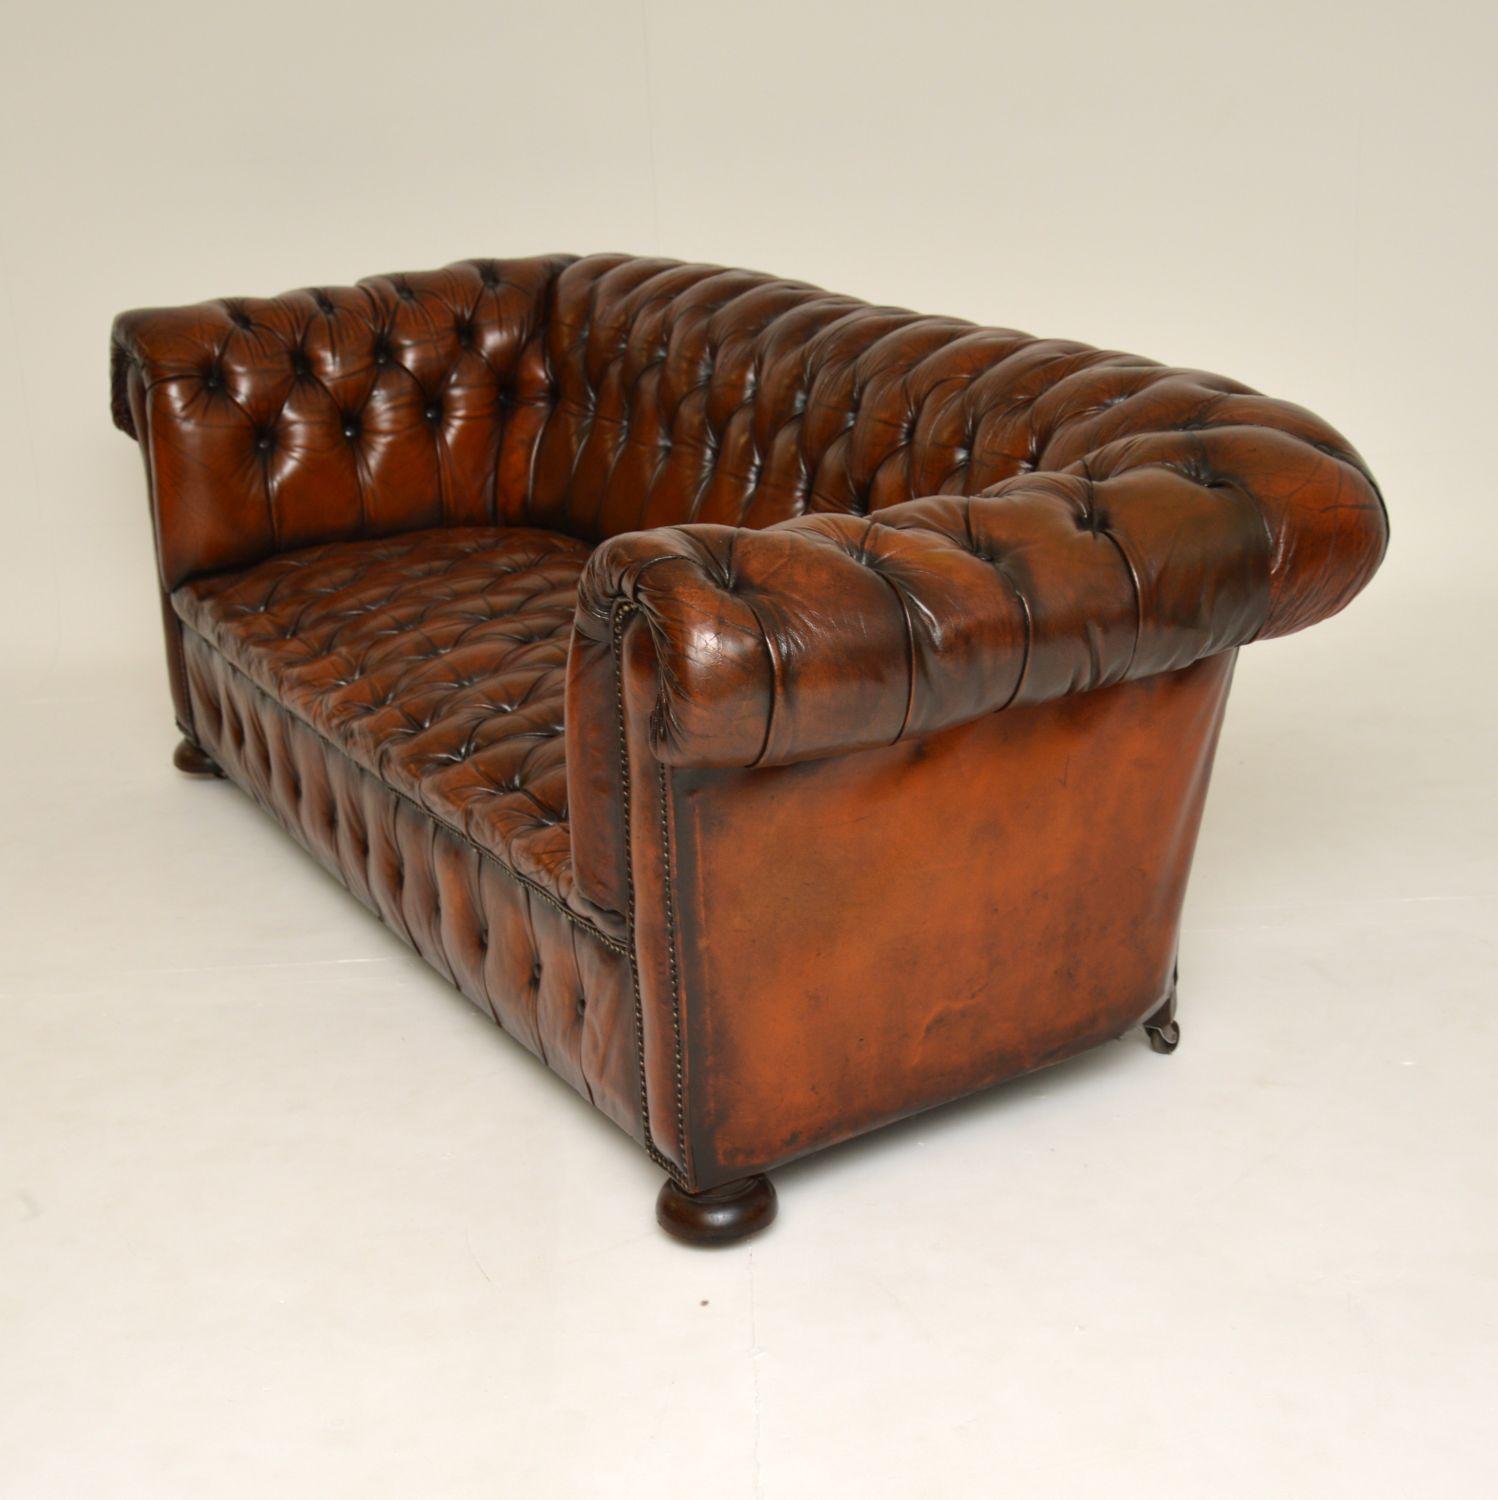 English Antique Deep Buttoned Leather Chesterfield Sofa